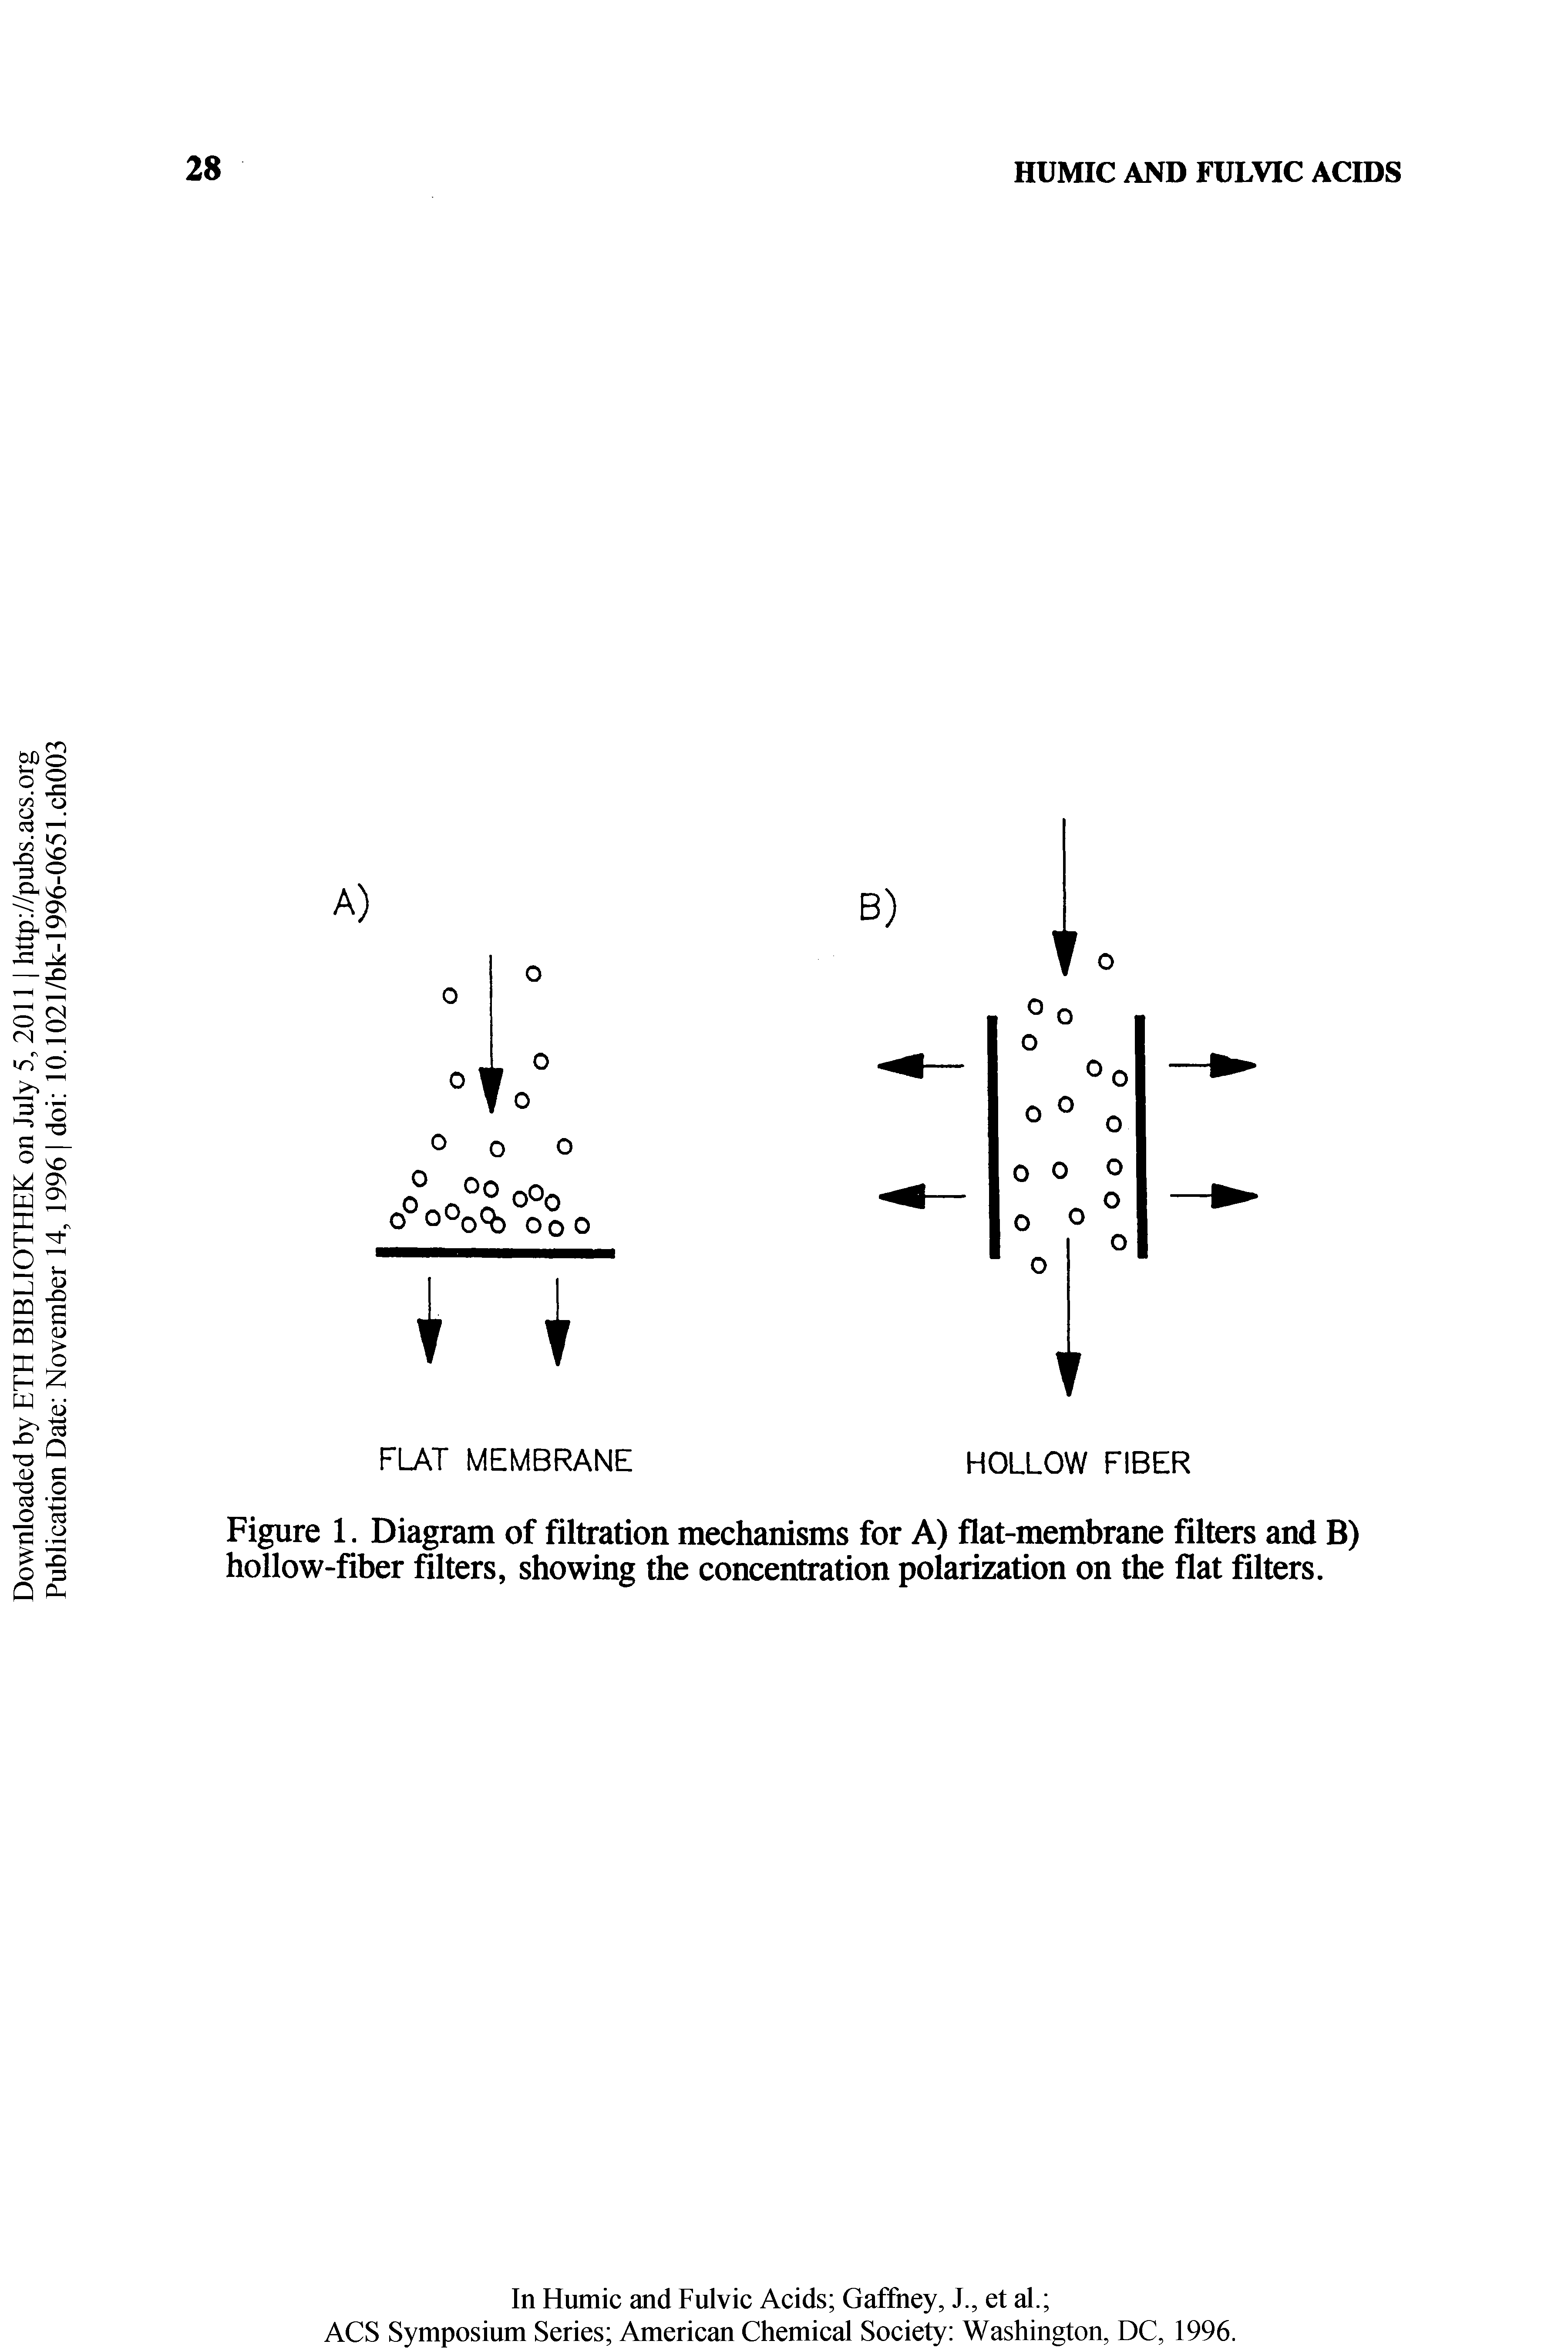 Figure 1. Diagram of filtration mechanisms for A) flat-membrane filters and B) hollow-fiber filters, showing the concentration polarization on the flat filters.